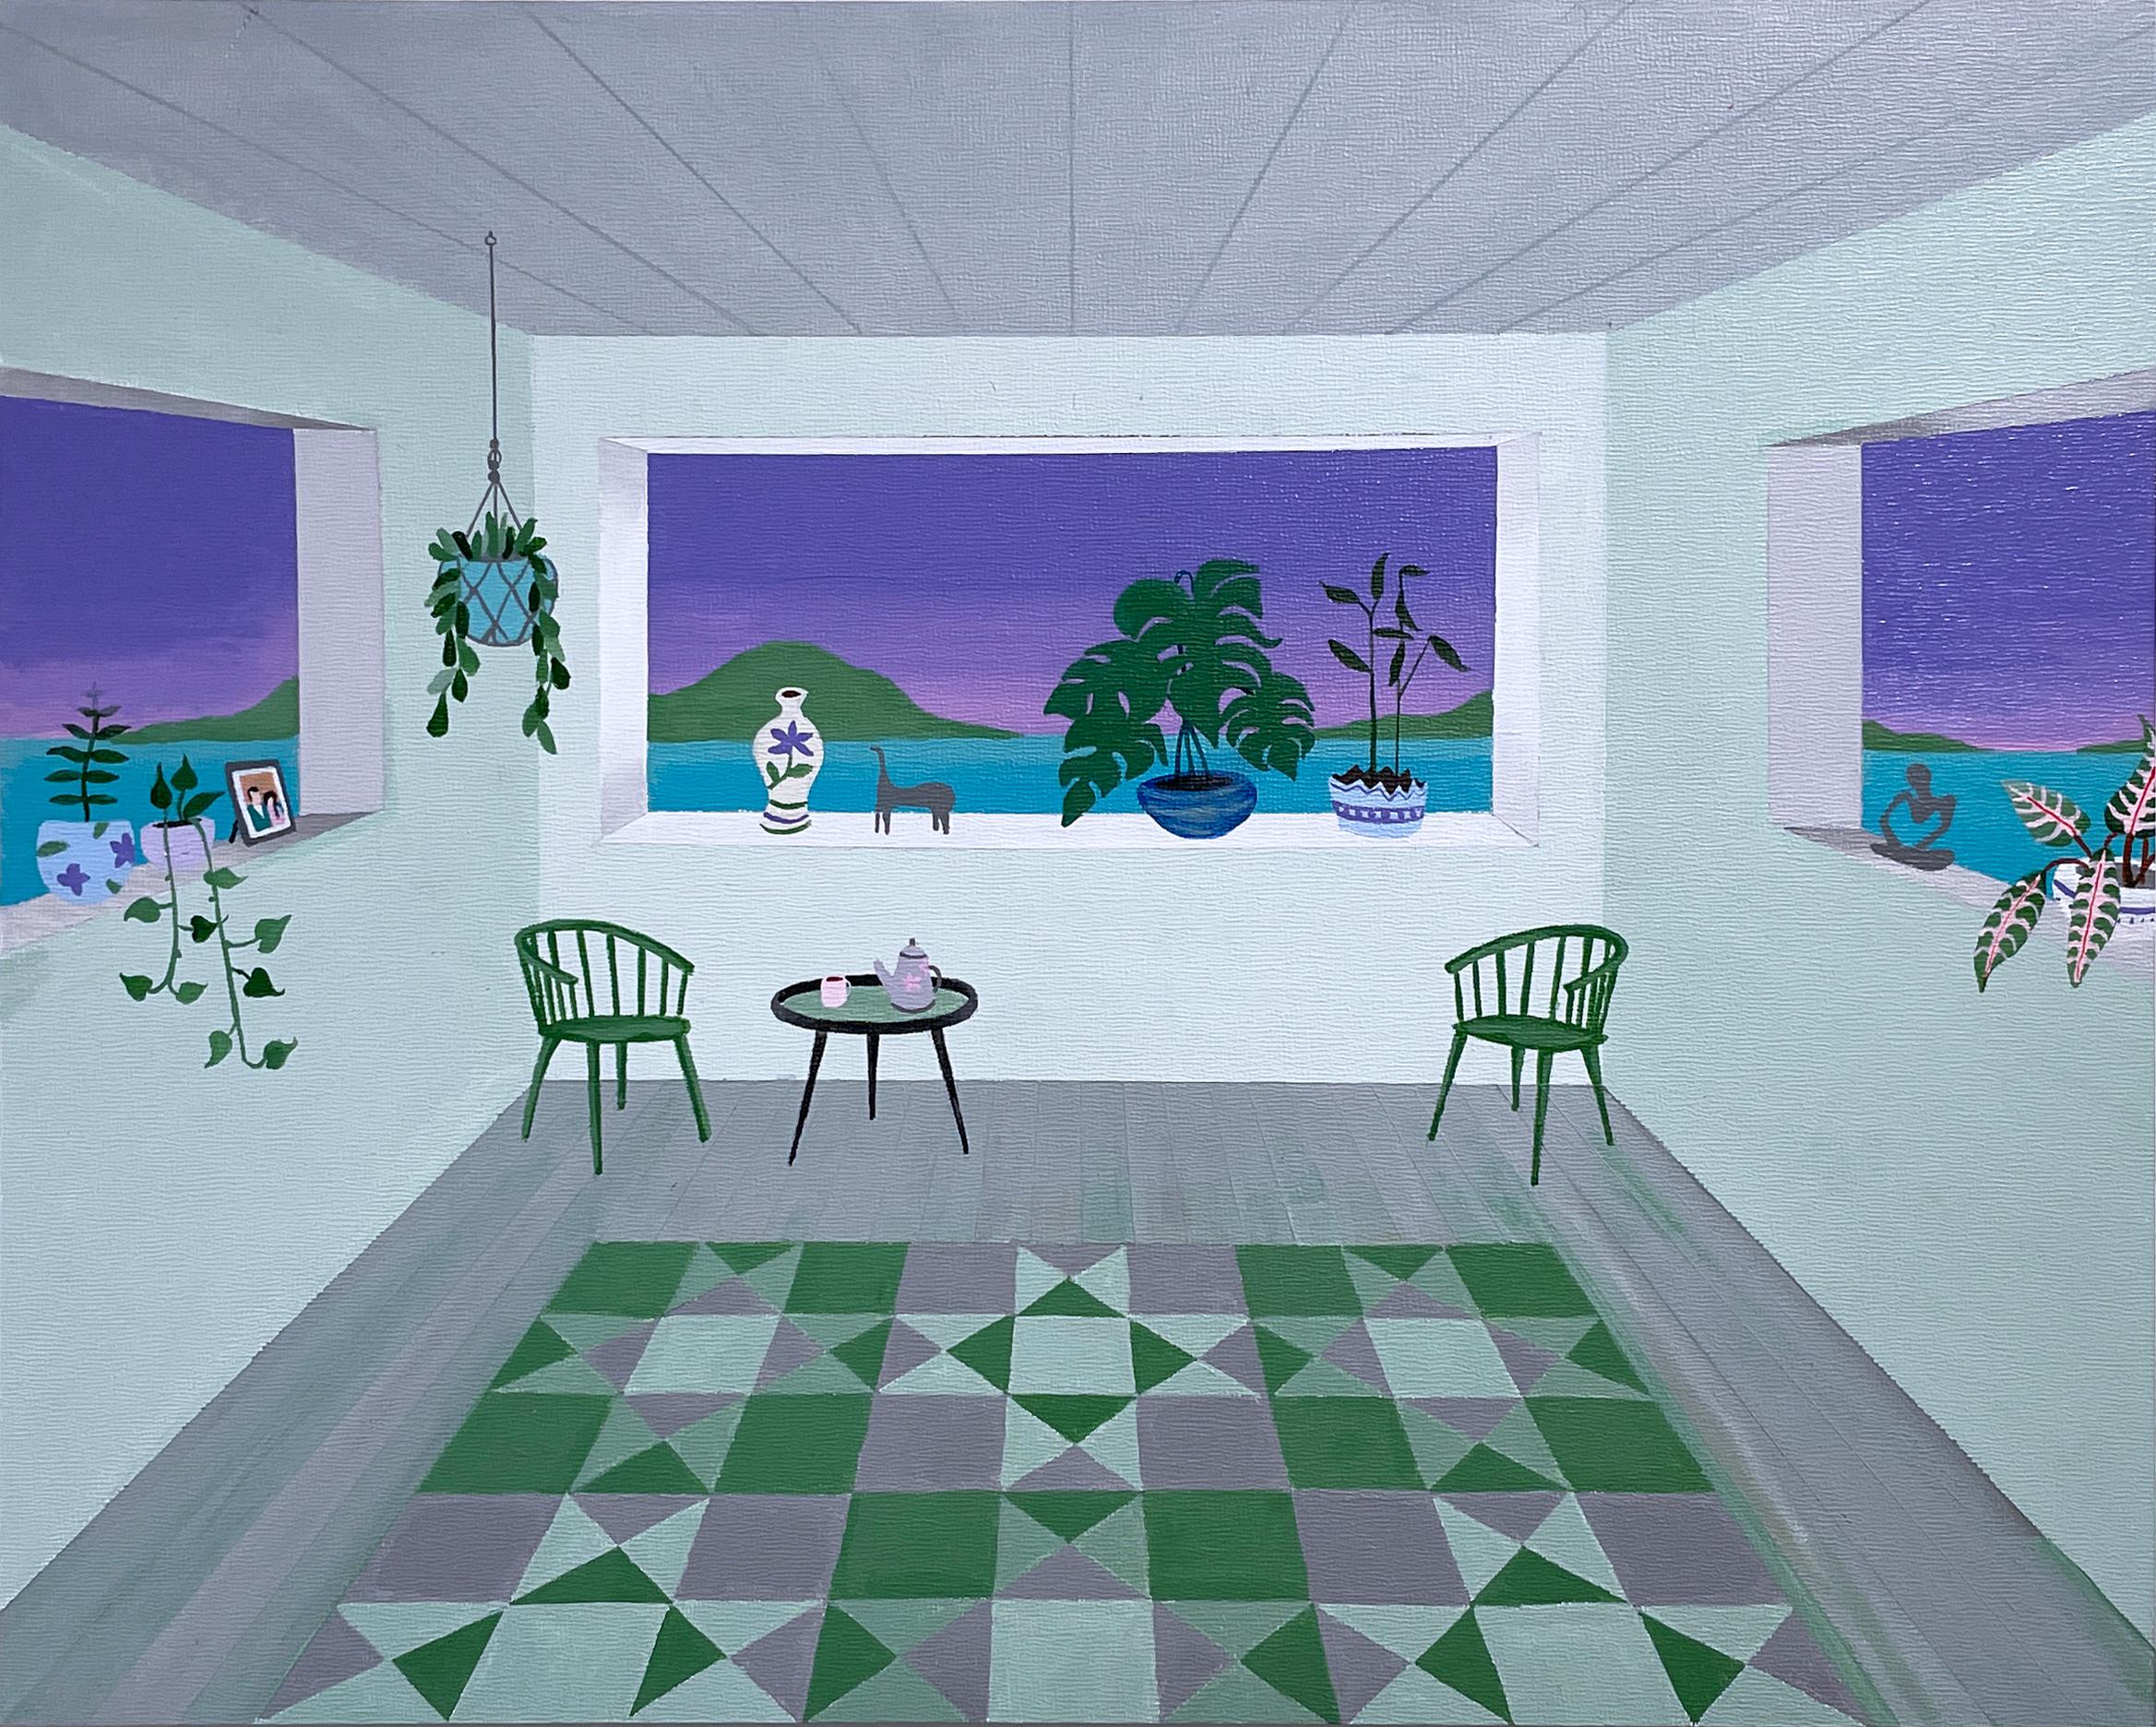 "Still Room" (2023) by Keith Garcia
Acrylic on wood panel
16 x 20 x 1.5" square

Figurative painting depicting an imagined room with windows on each wall that look out onto purple skies and green hills in the distance, overlooking a waterscape. The